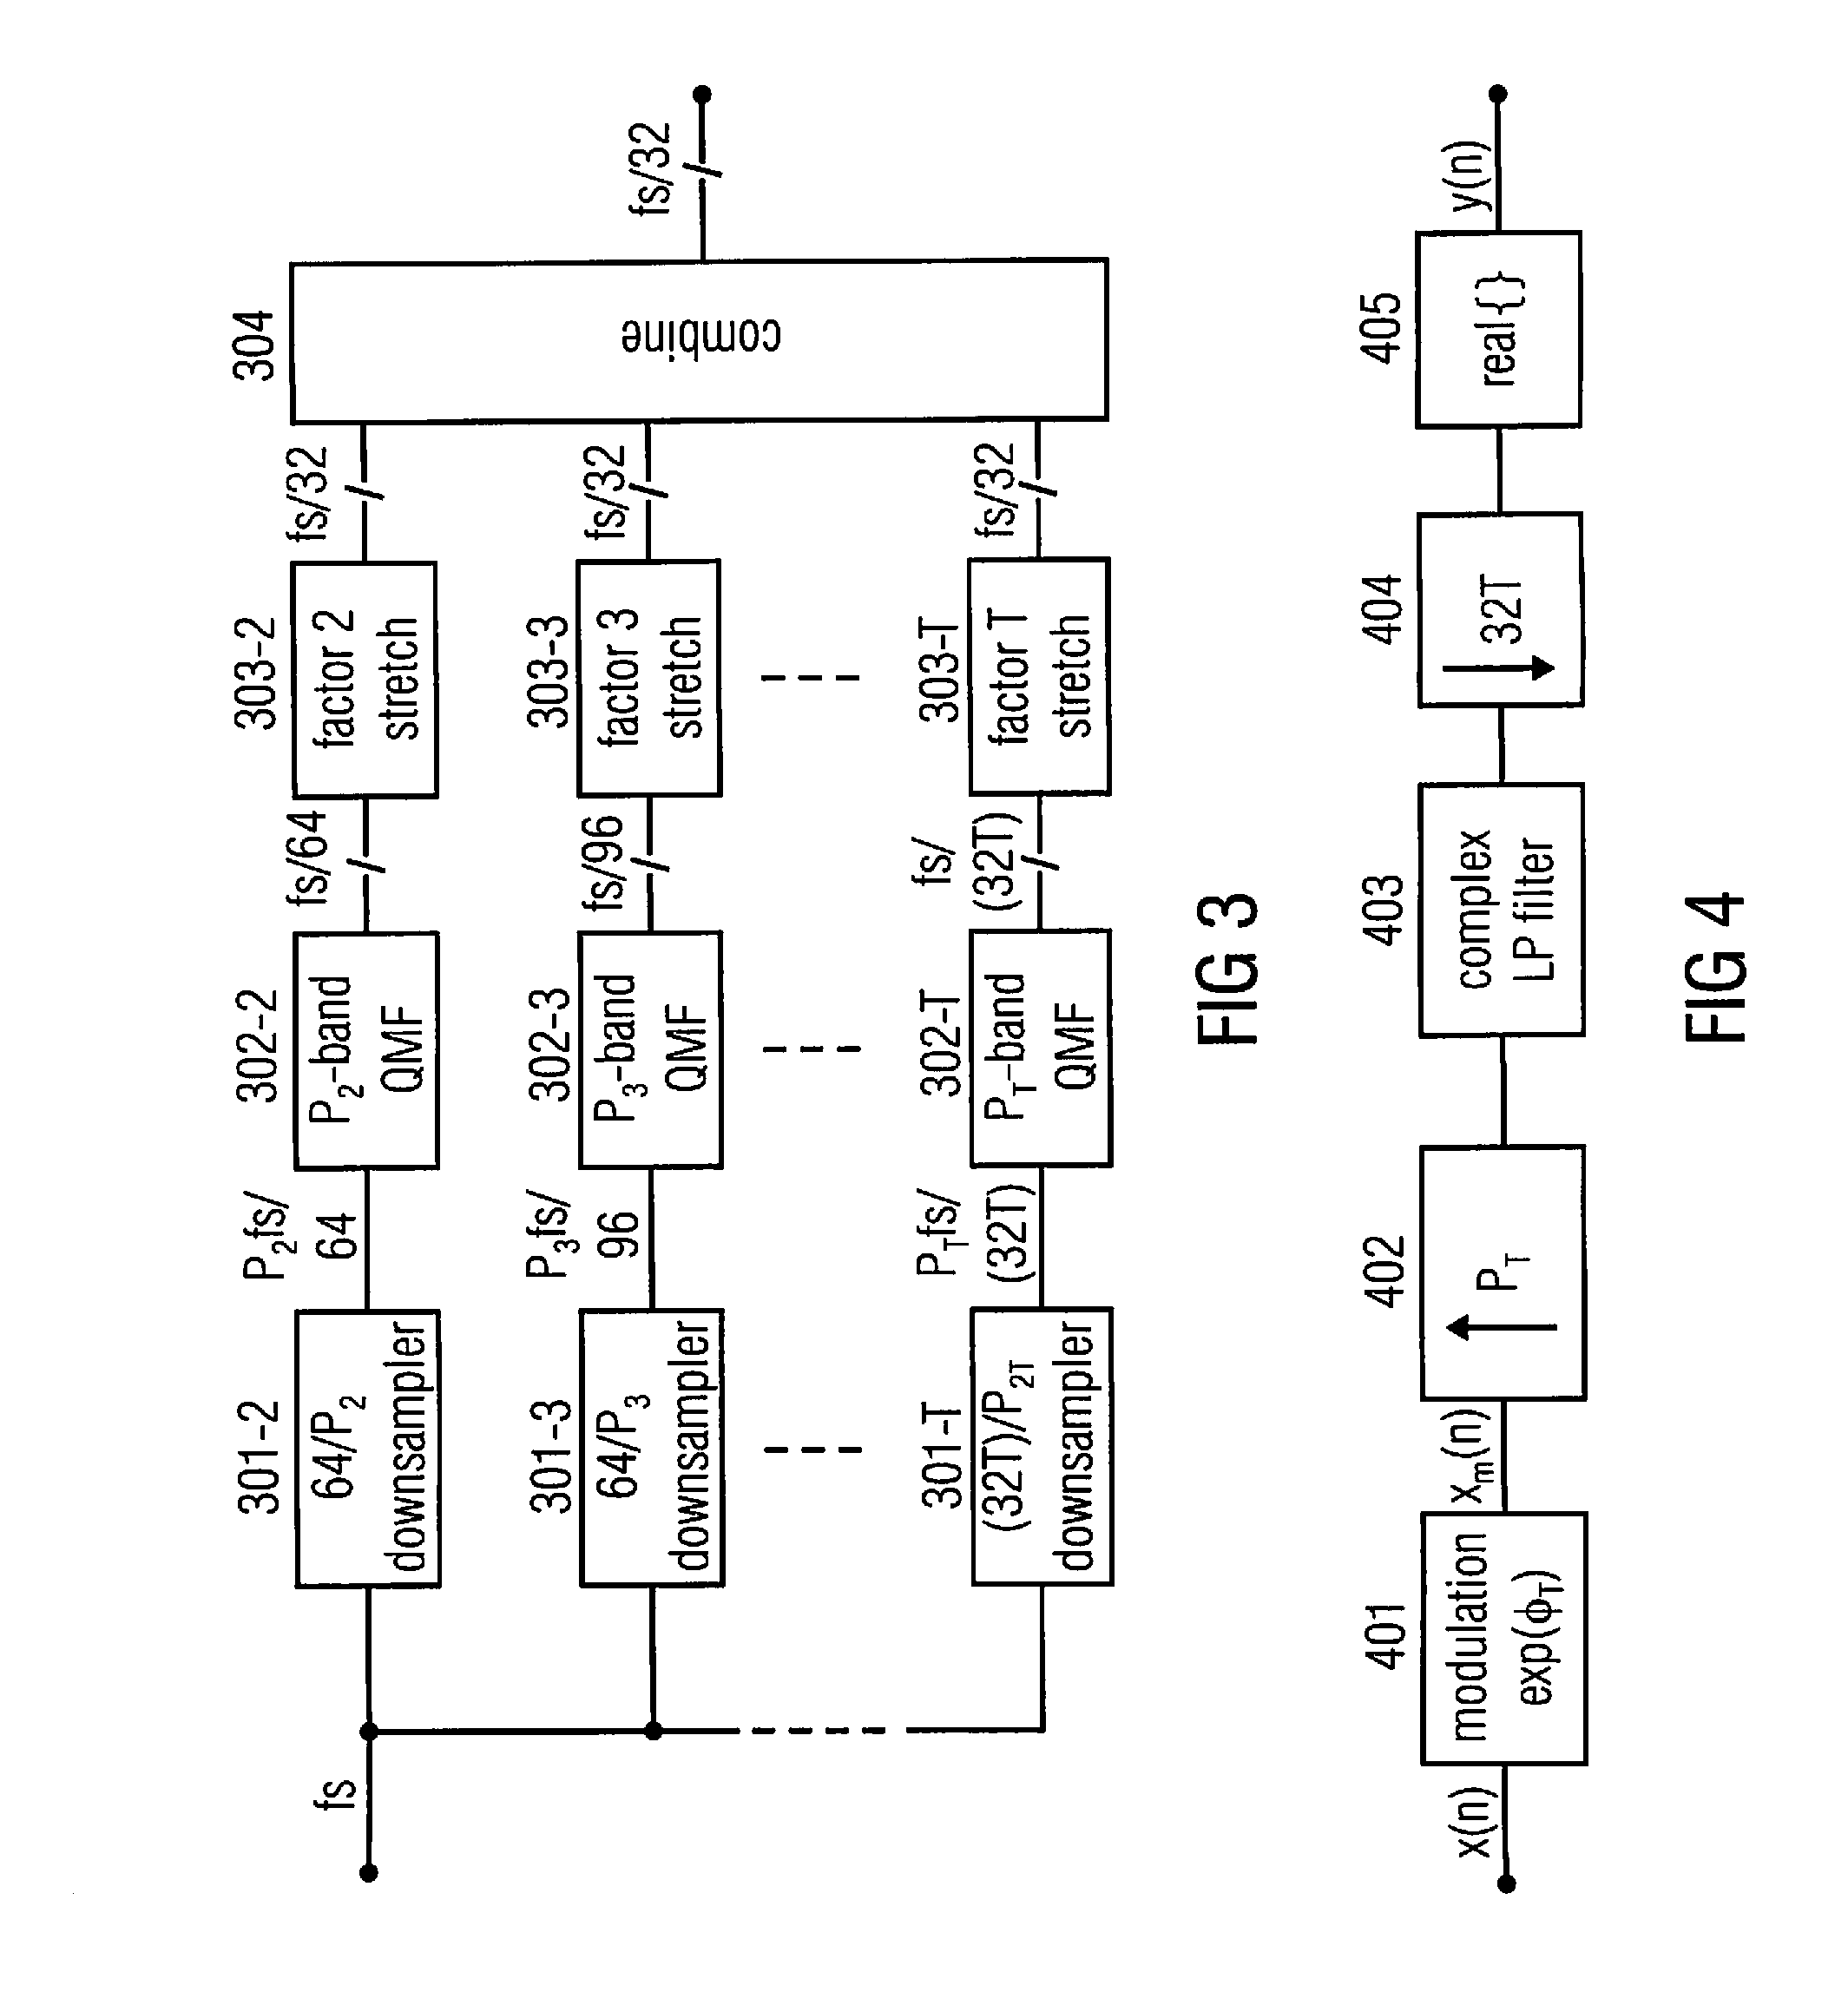 Apparatus and method for processing an input audio signal using cascaded filterbanks